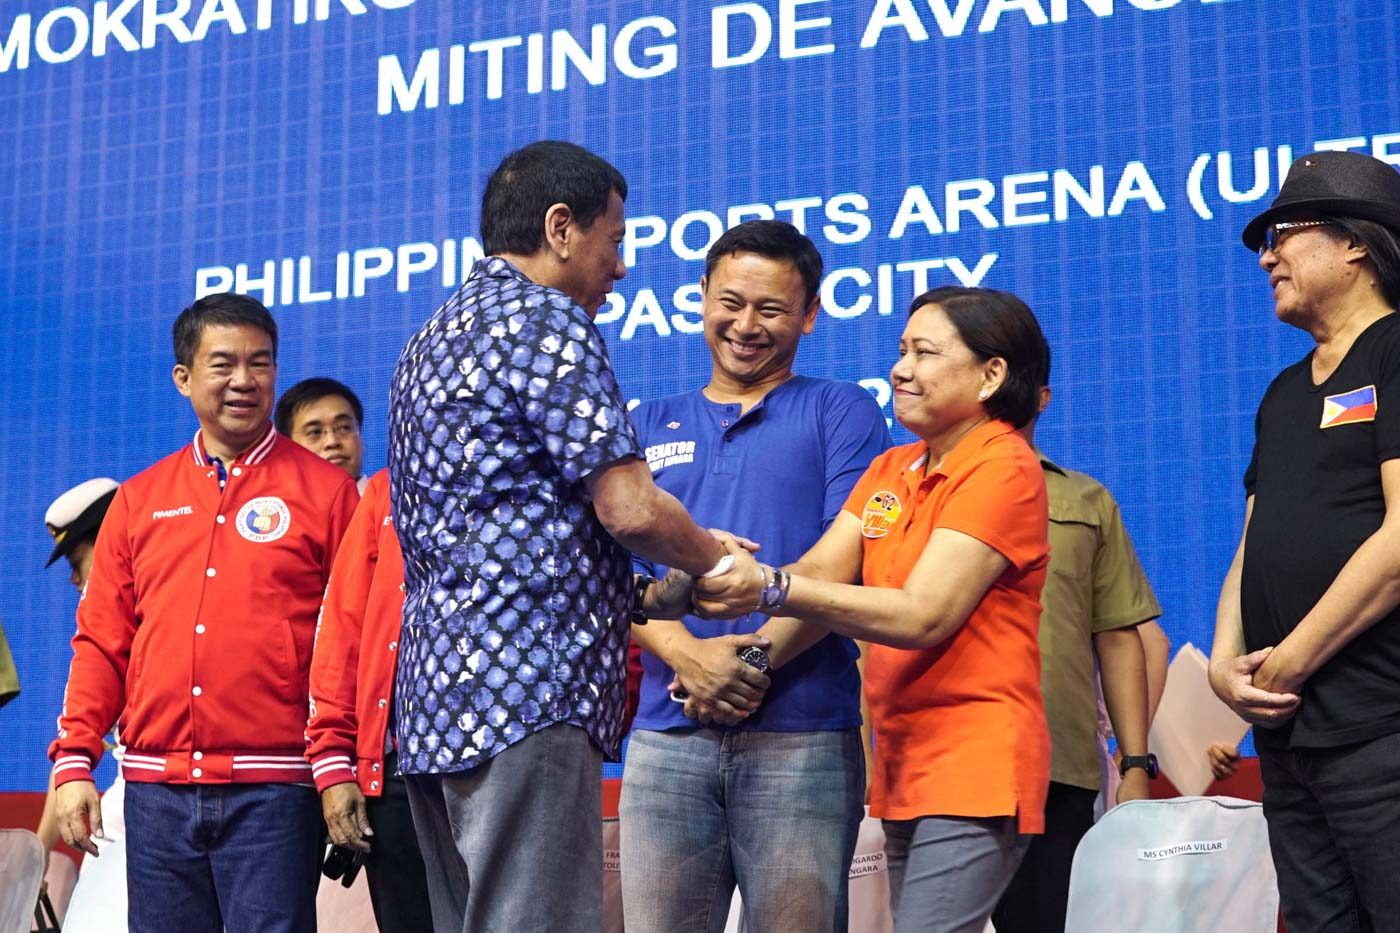 ENDORSEMENT. President Duterte shares a light moment with senators Cynthia Villar and Sonny Angara on the sidelines of the PDP-Laban miting de avance in Pasig City. Malacañang photo 